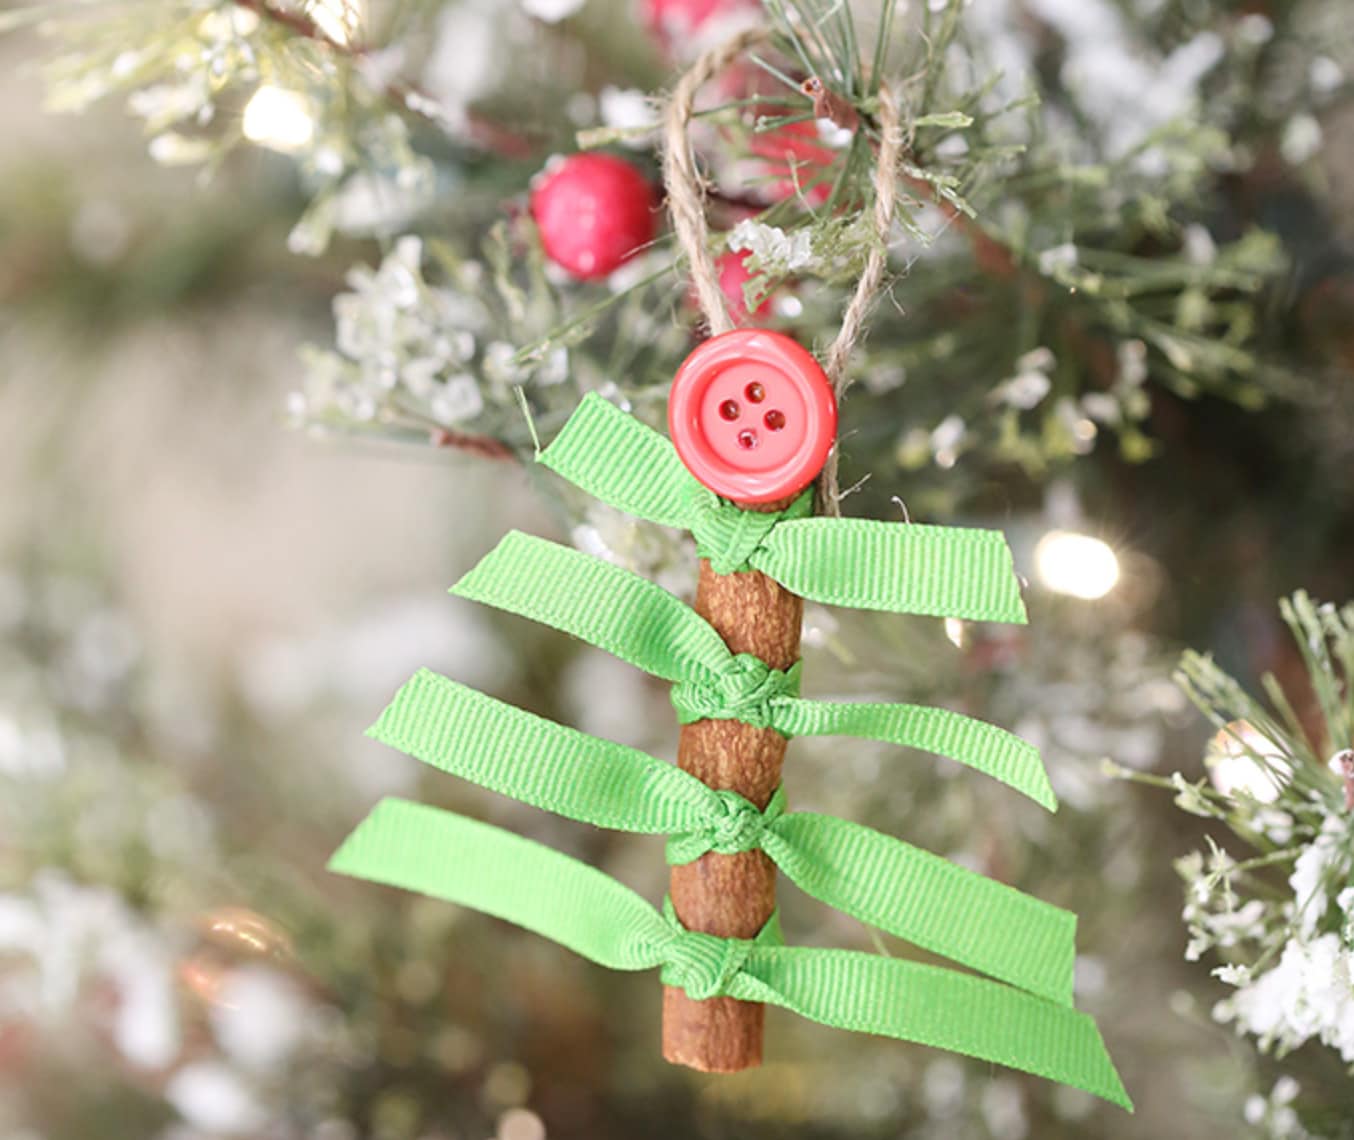 19 fun, easy DIY Christmas ornaments to make with kids - Care.com Resources